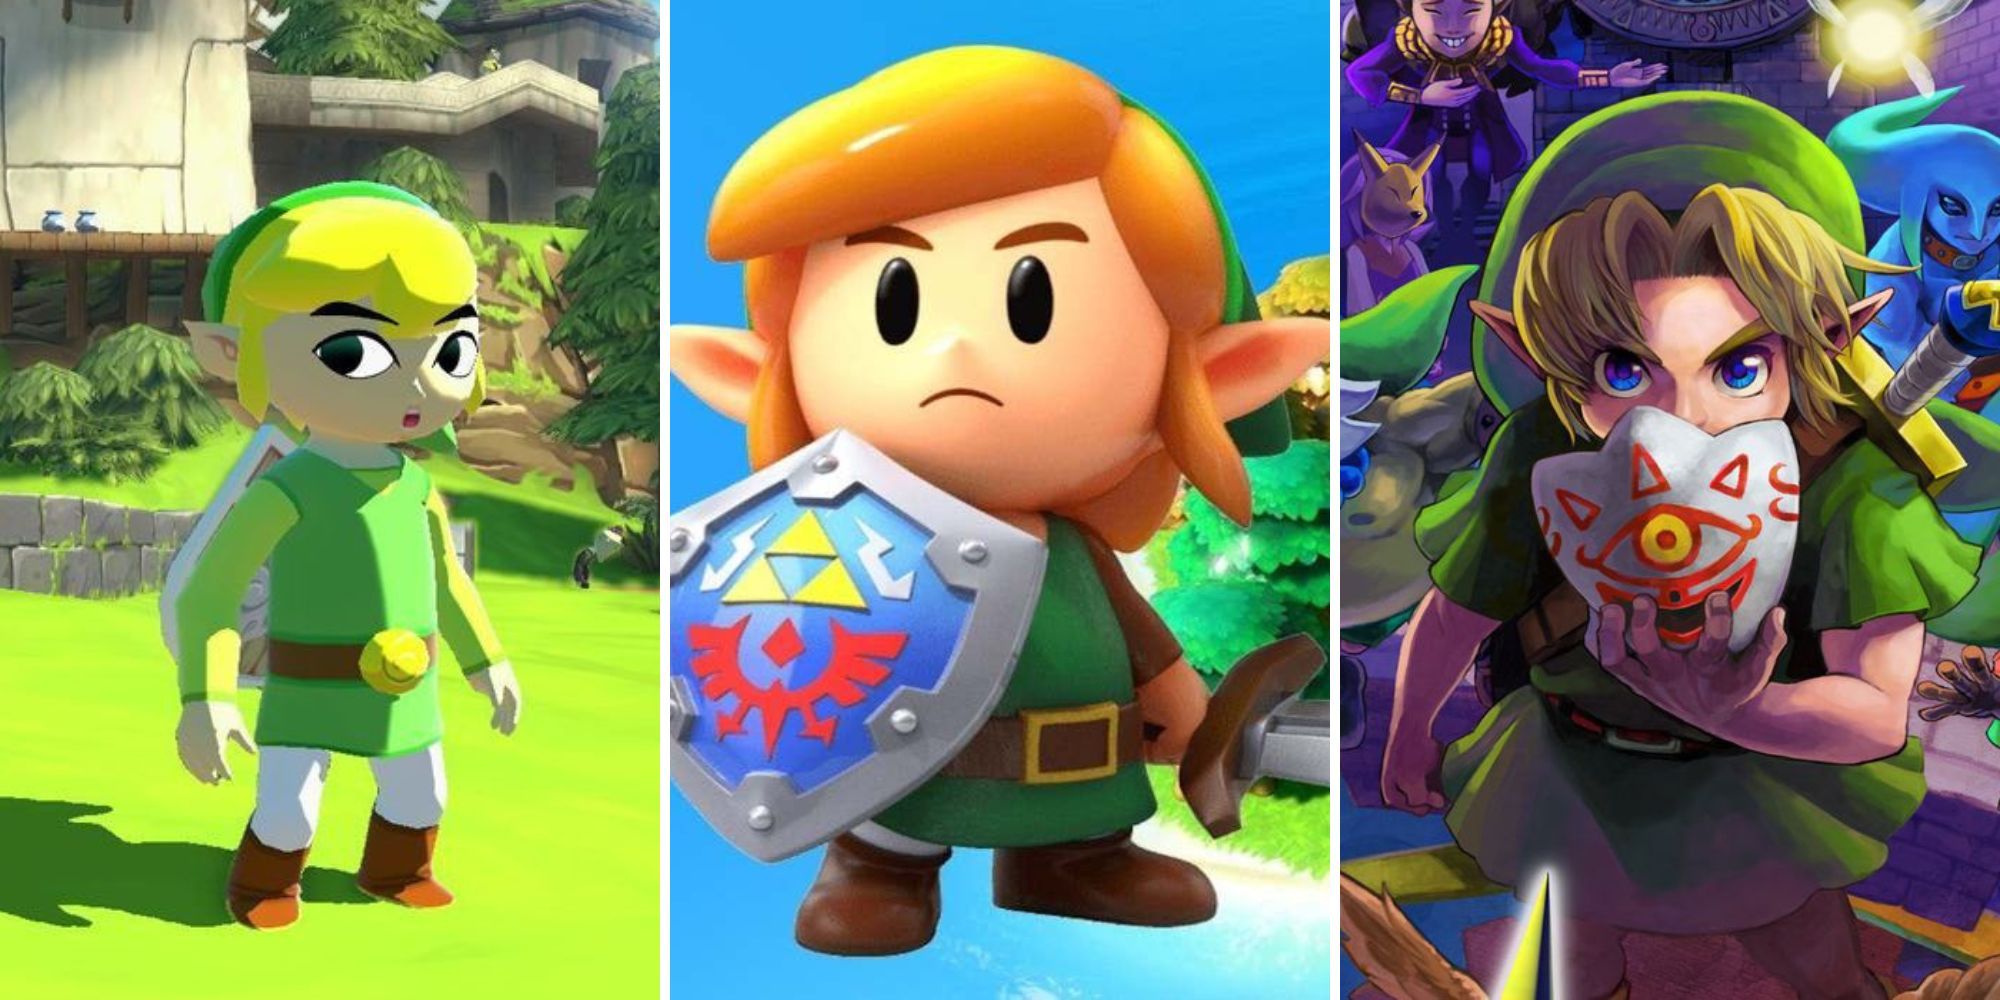 Toon Link looks over his shoulder, Link holds his shield in front of him, Young Link holds a mask to his face